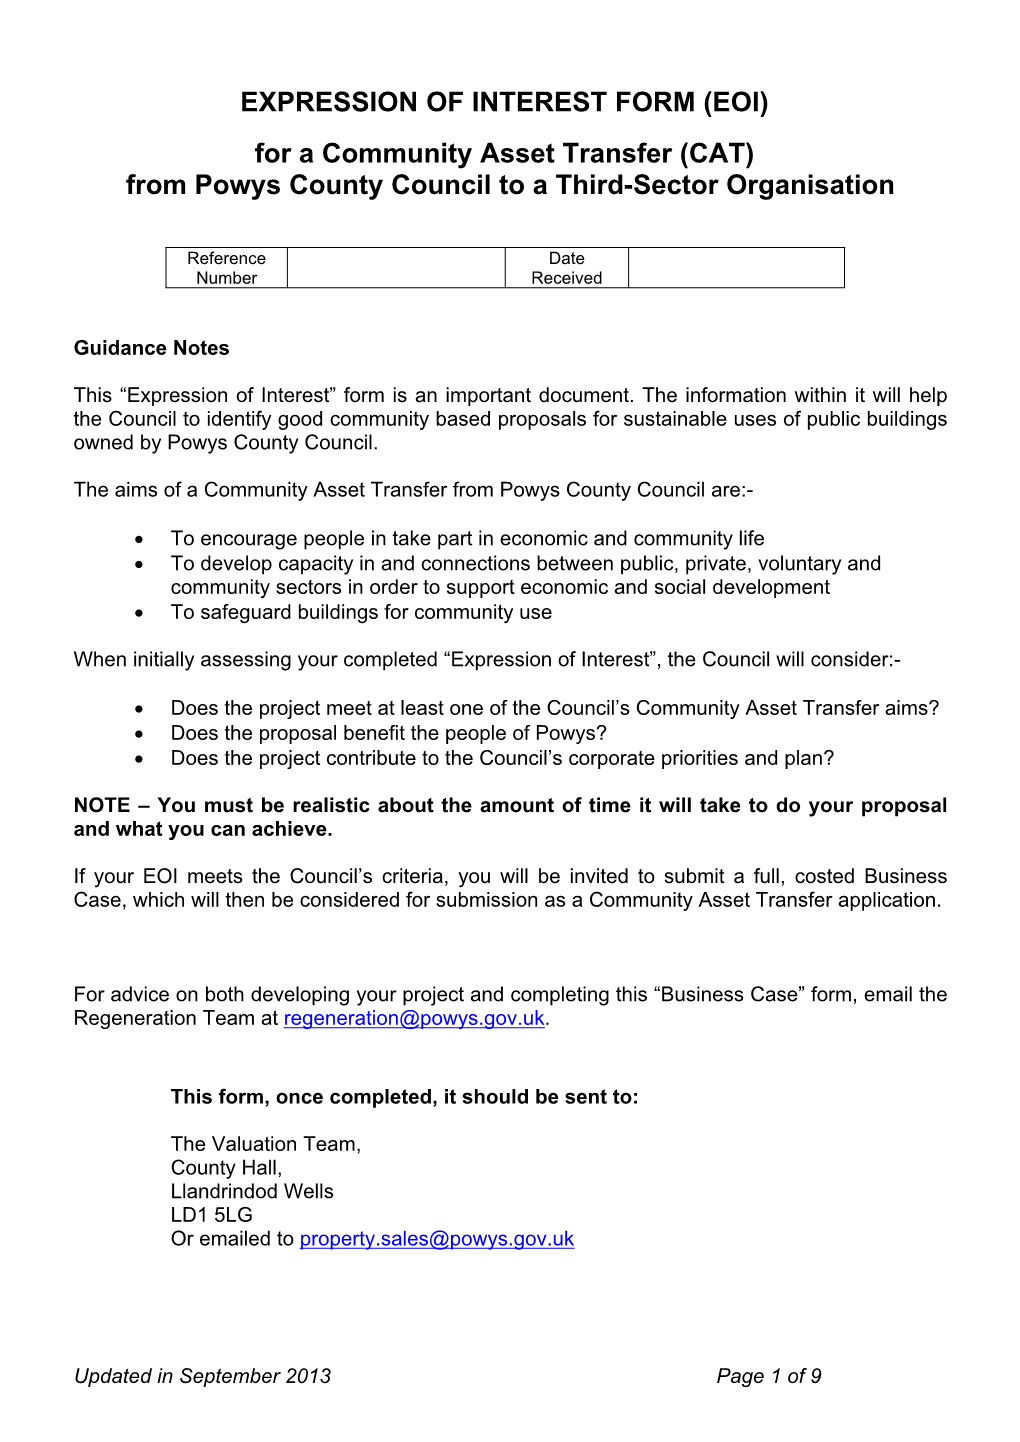 EOI) for a Community Asset Transfer (CAT) from Powys County Council to a Third-Sector Organisation